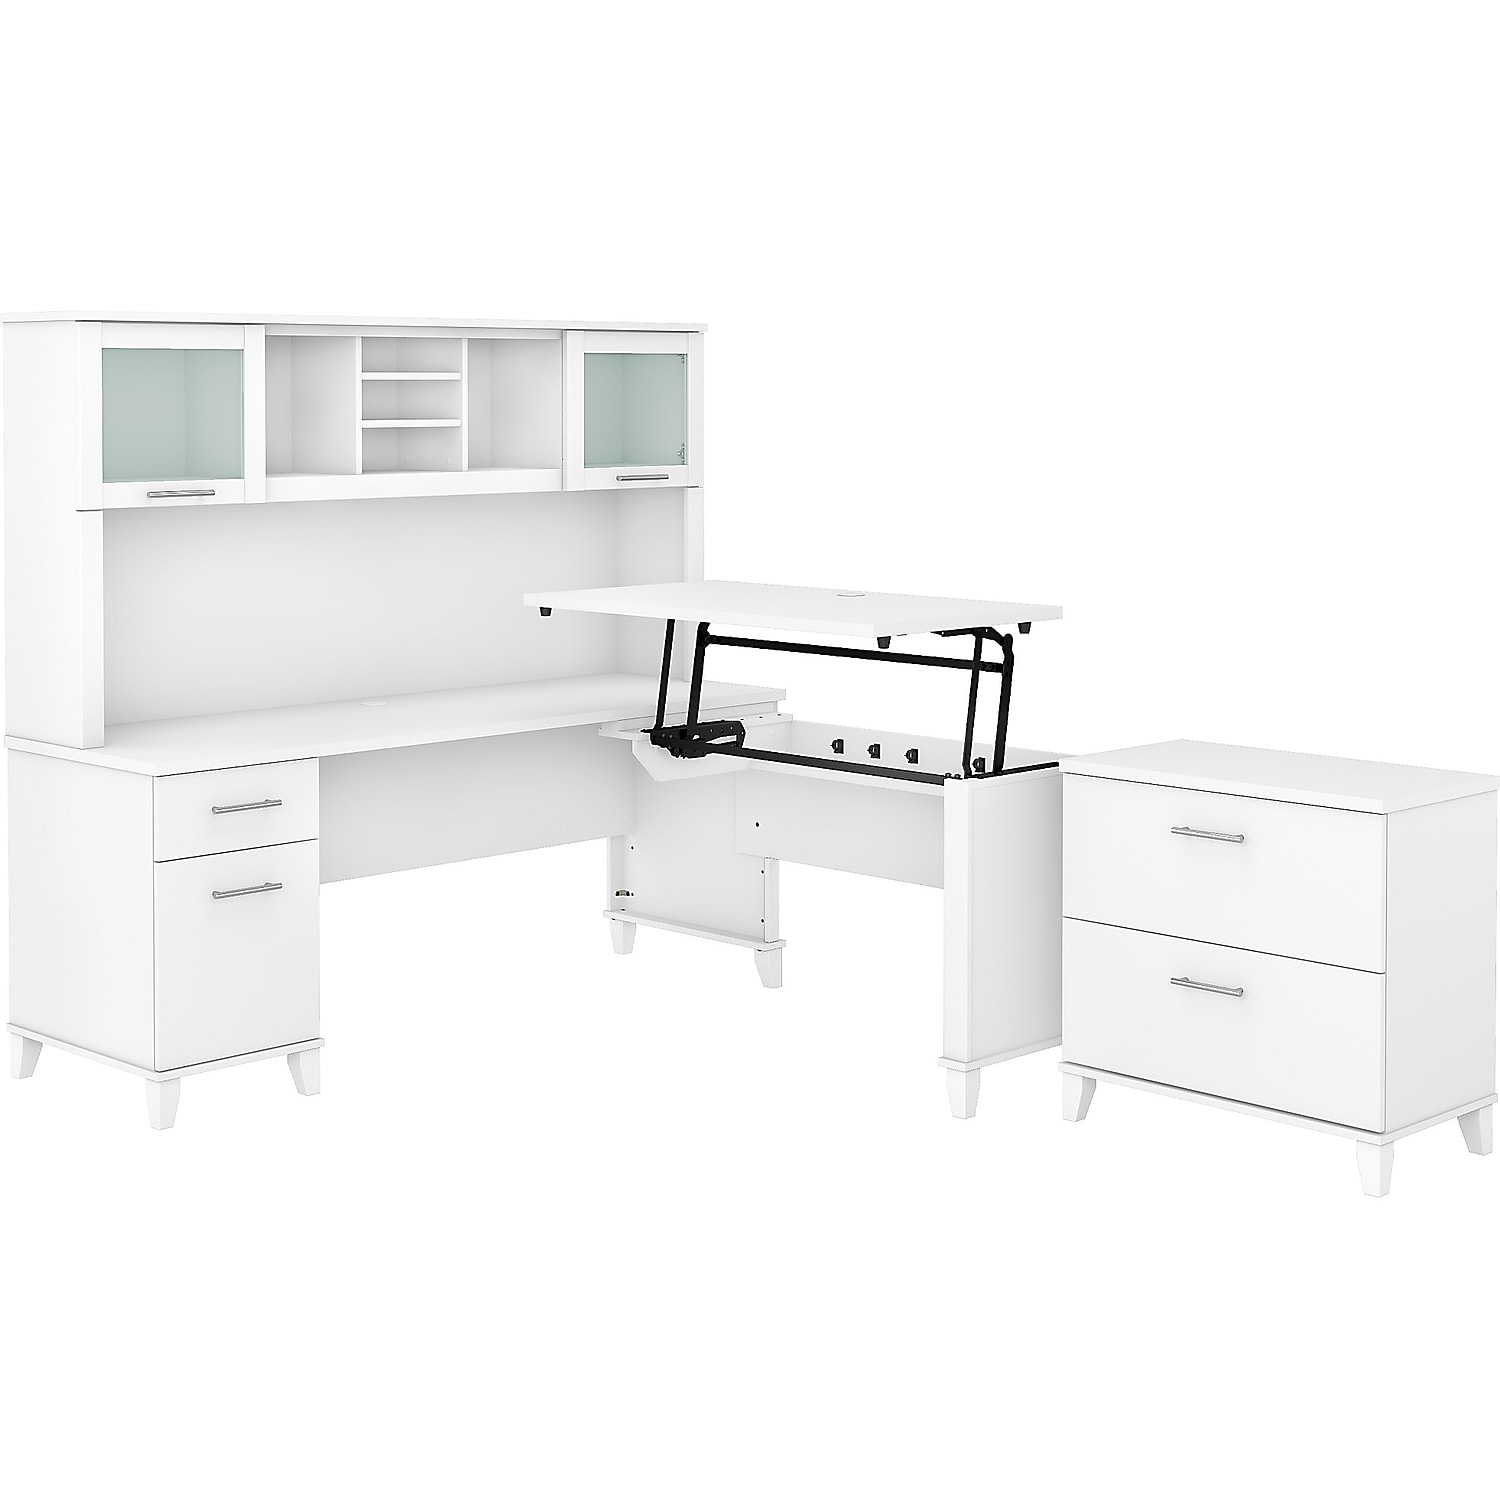 Somerset Sit-Stand L Desk with Hutch and File Cabinet in White - Engineered Wood - image 1 of 8